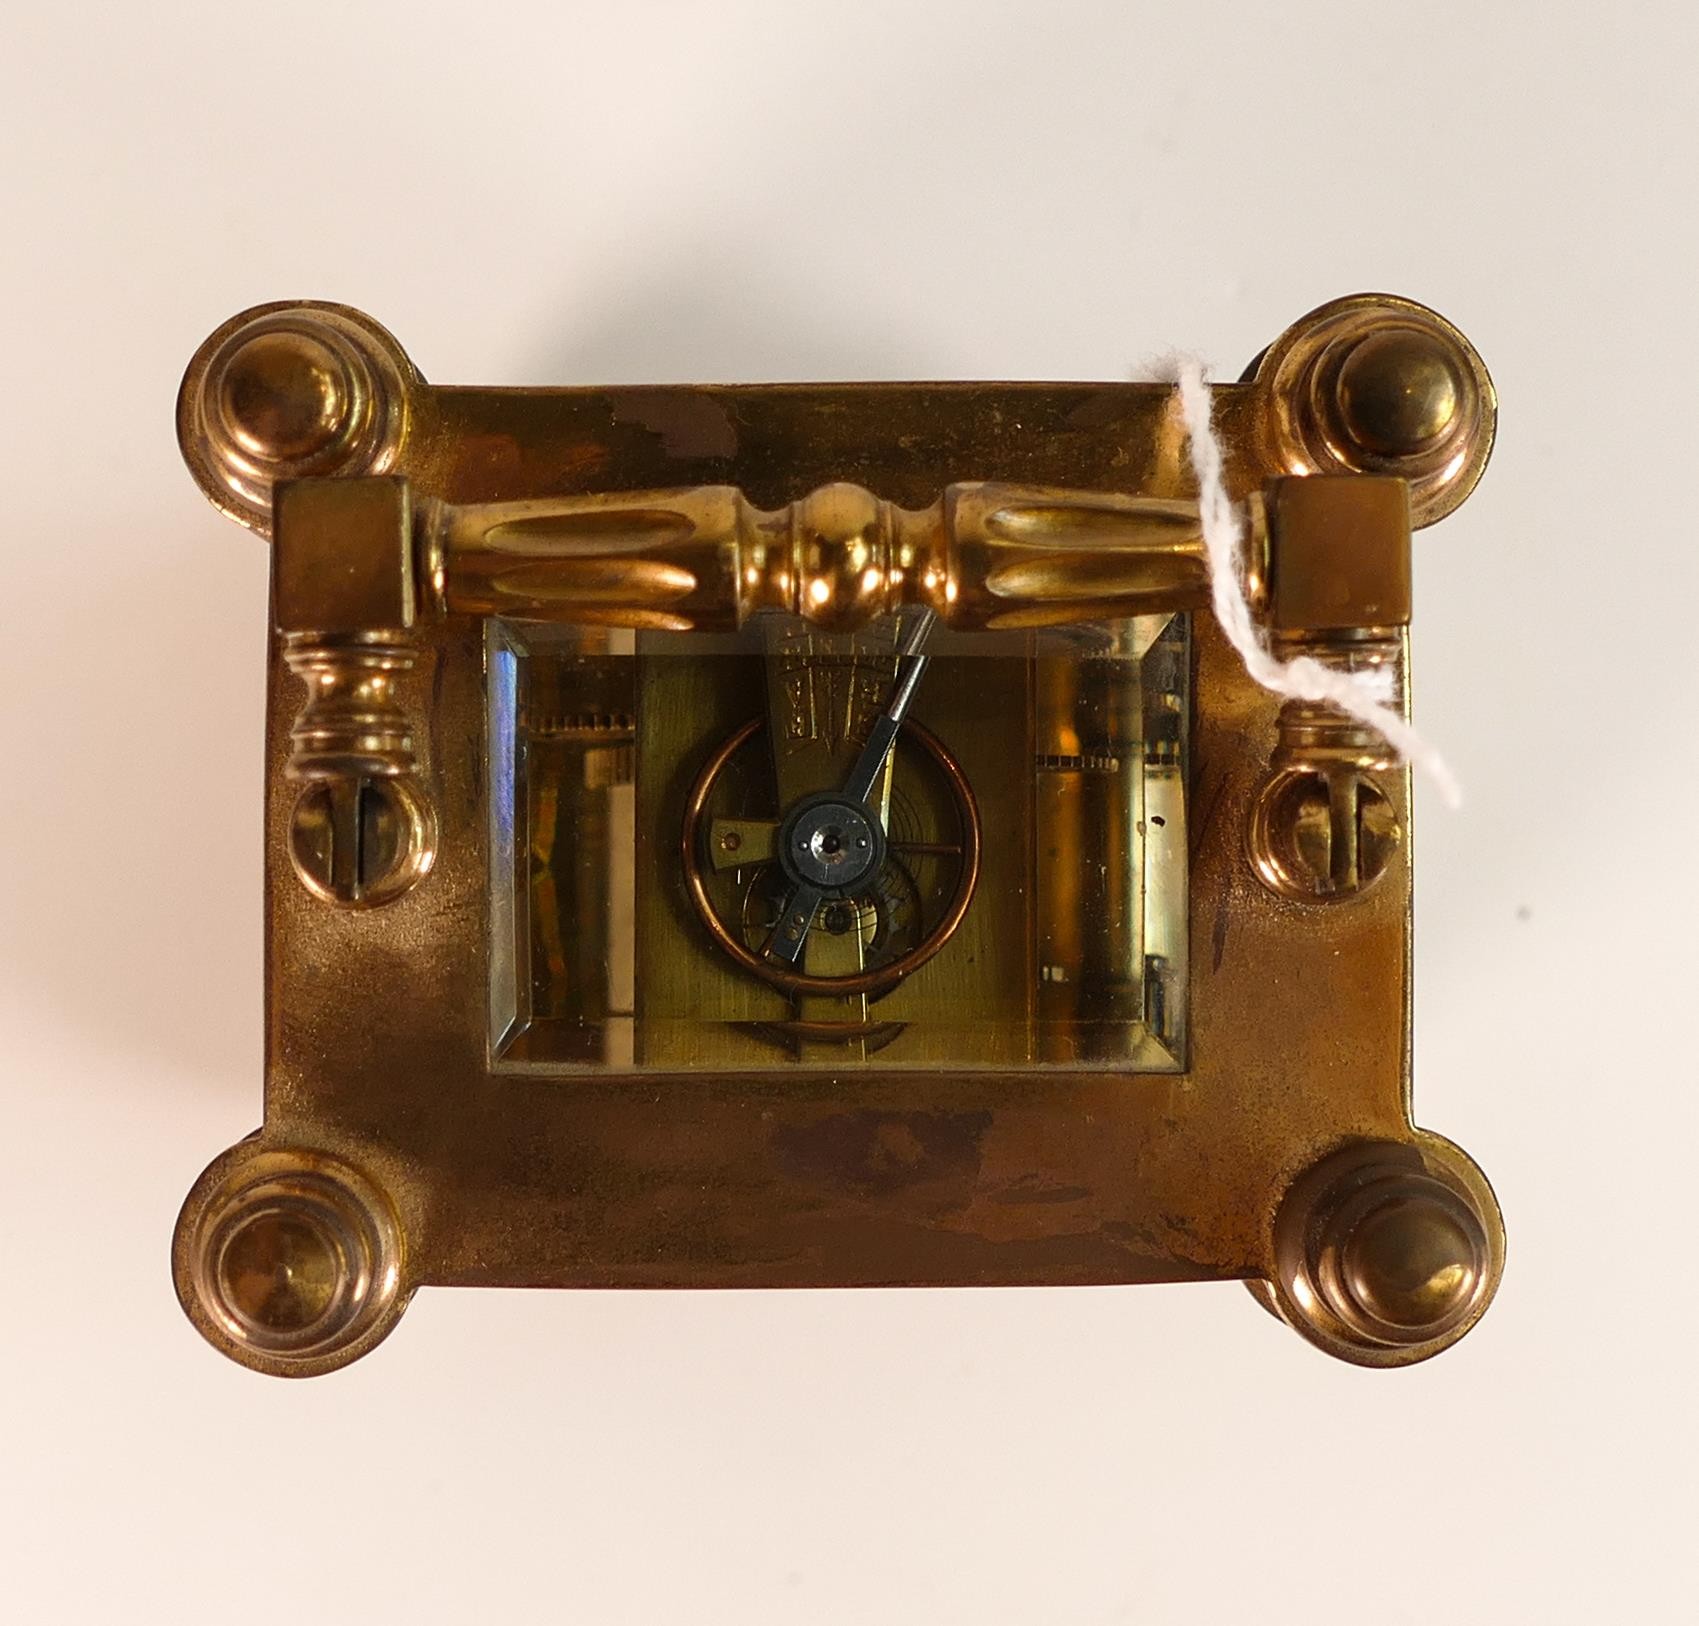 Exceedingly ornate brass carriage clock, late 19th century, no key, sold as not working. 15cm high - Image 6 of 6